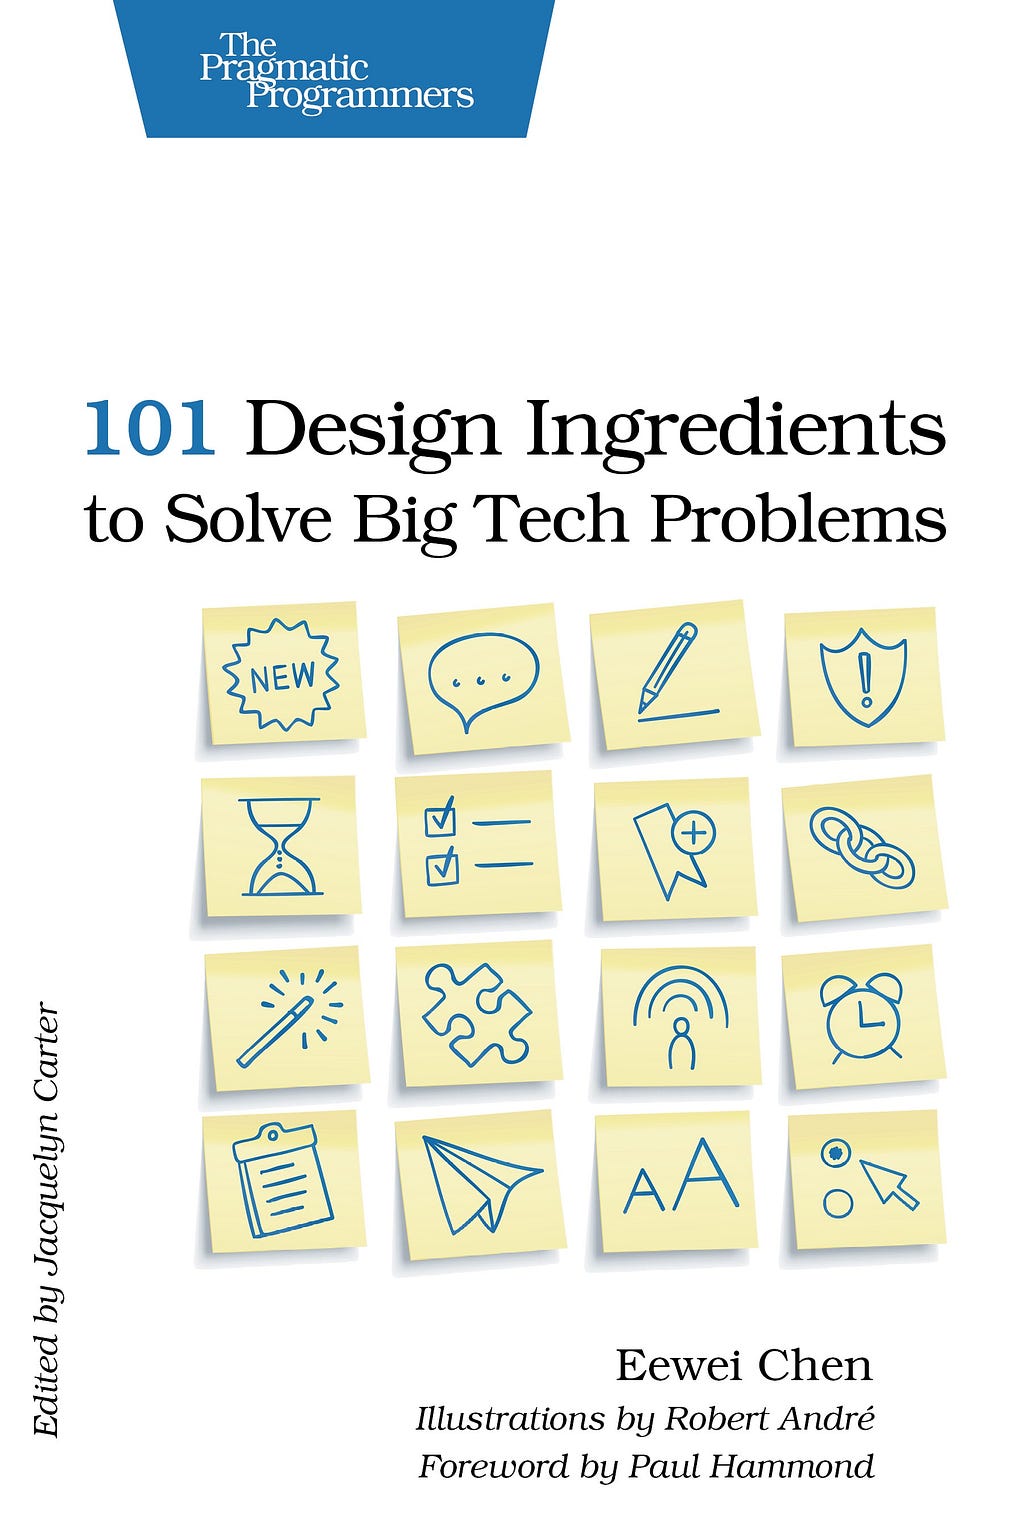 Book cover featuring sticky notes with various simple drawings